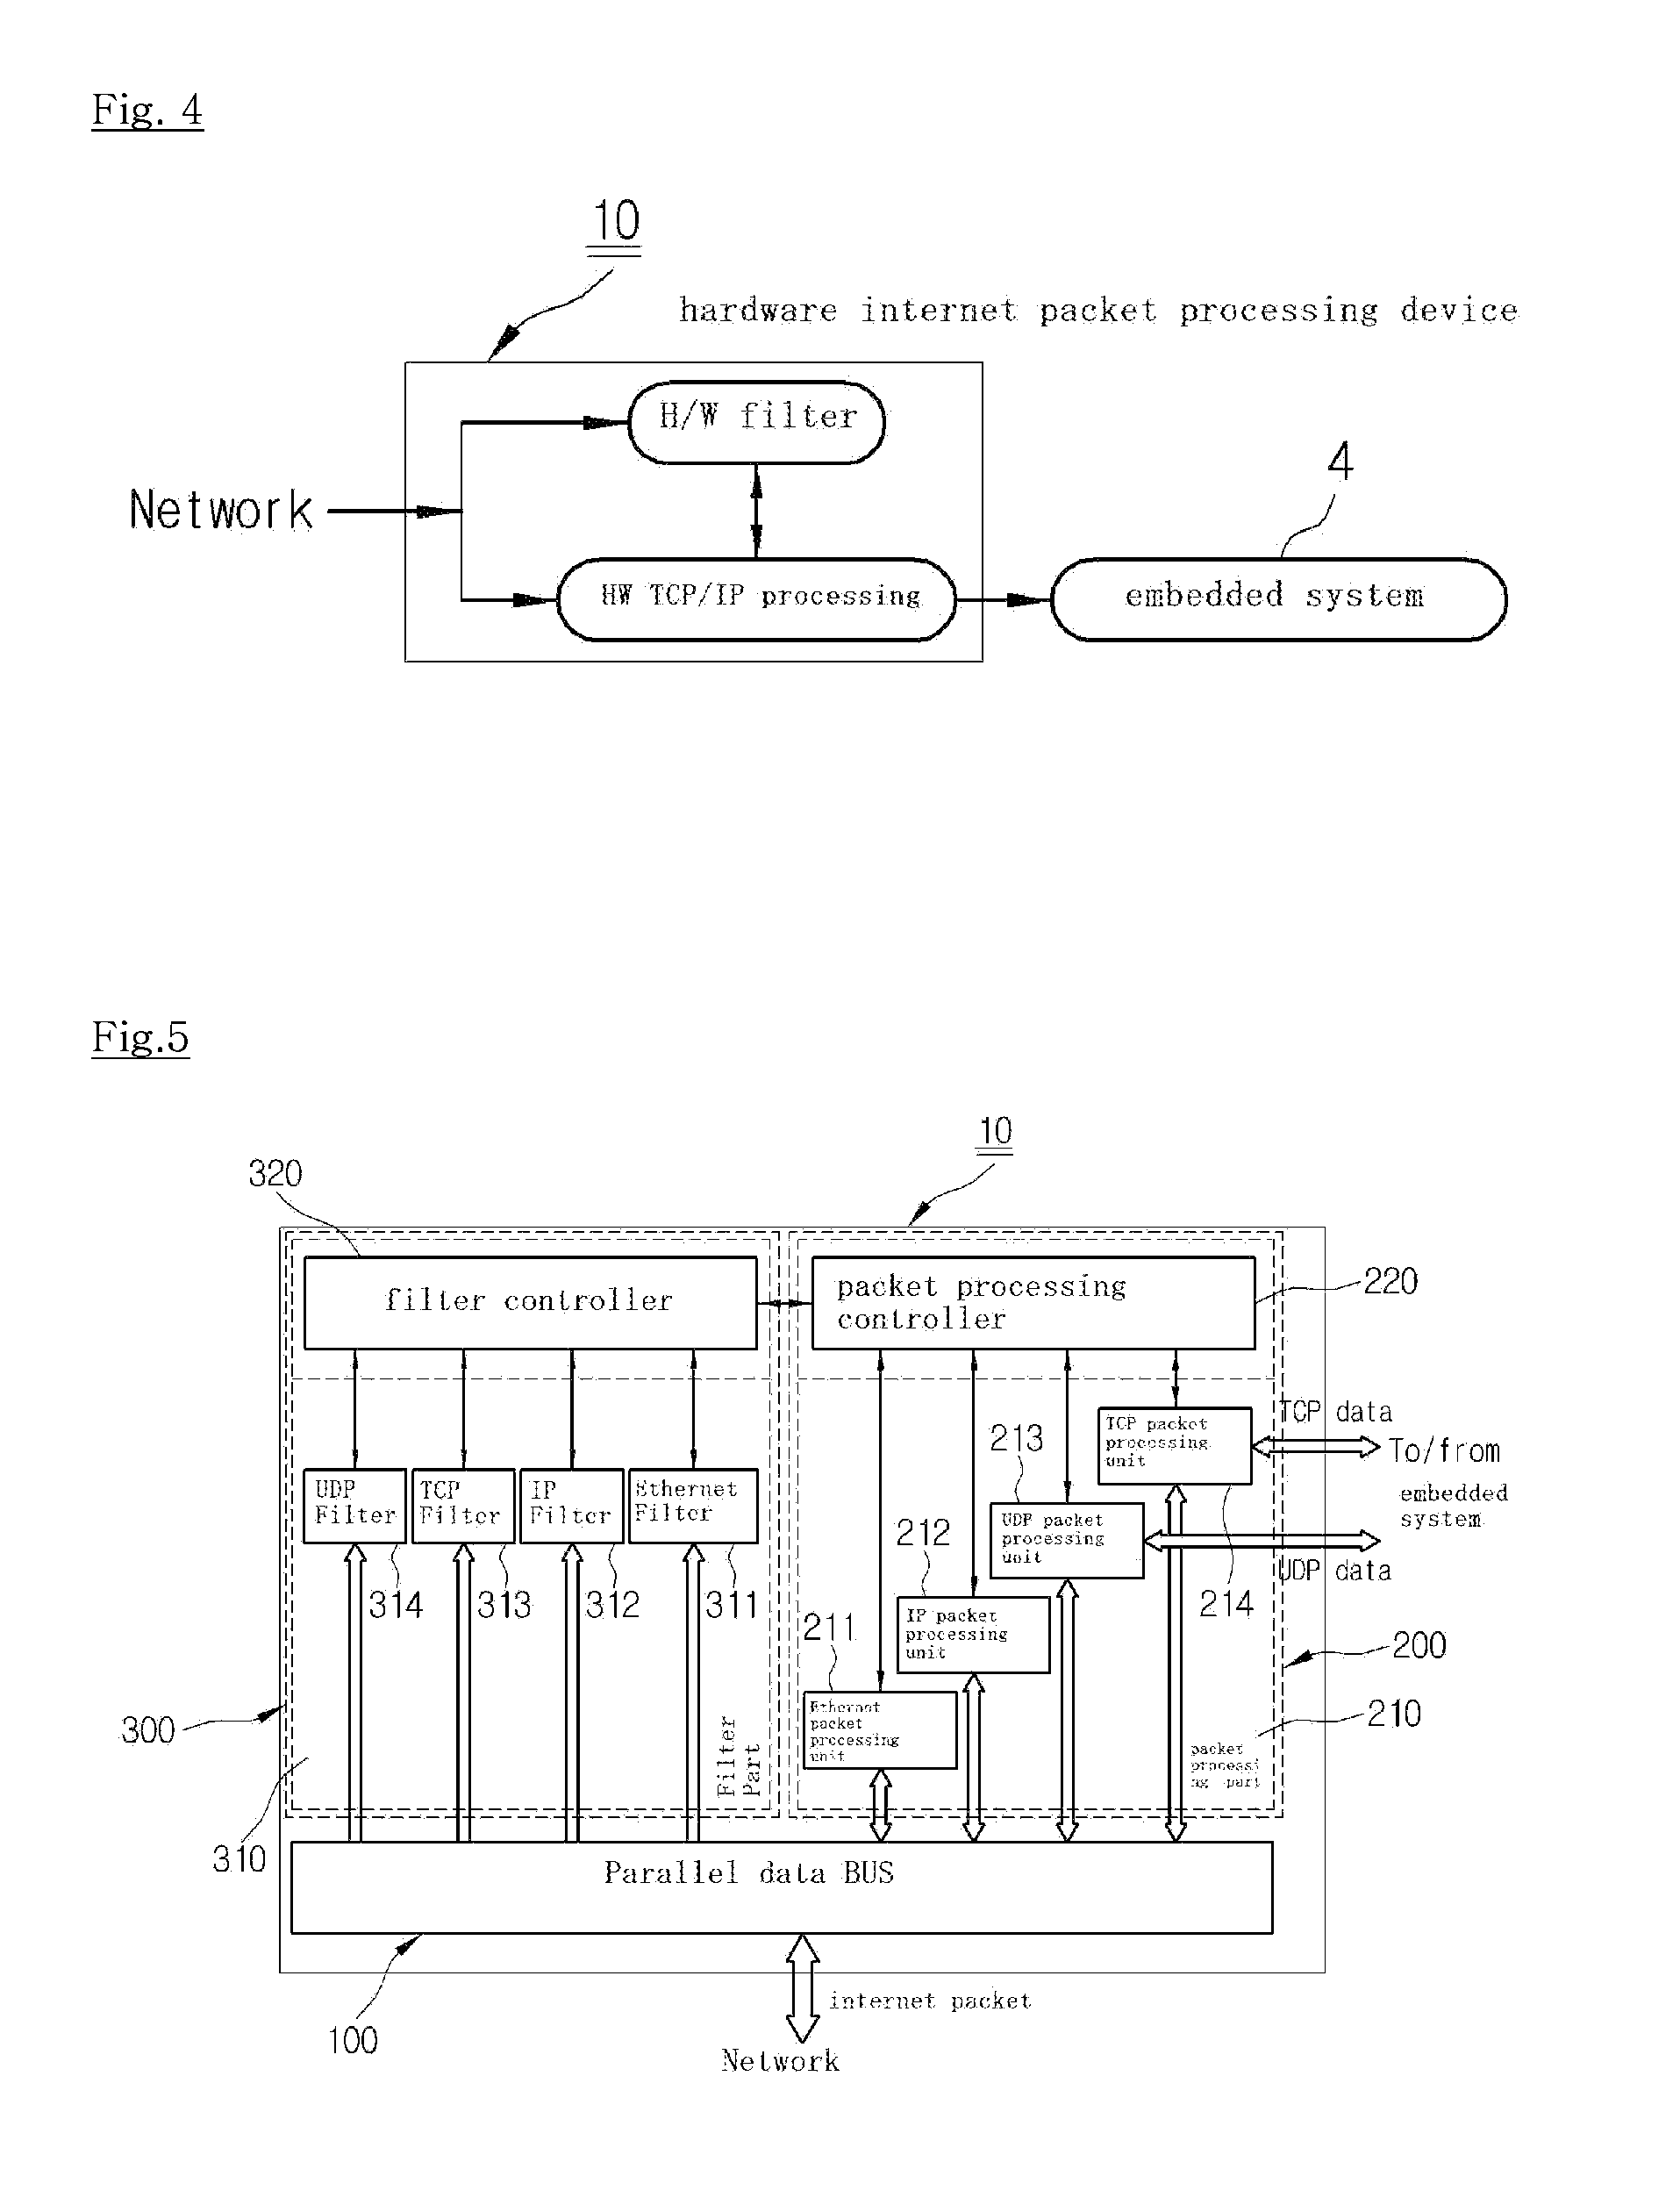 Unattackable hardware internet packet processing device for network security